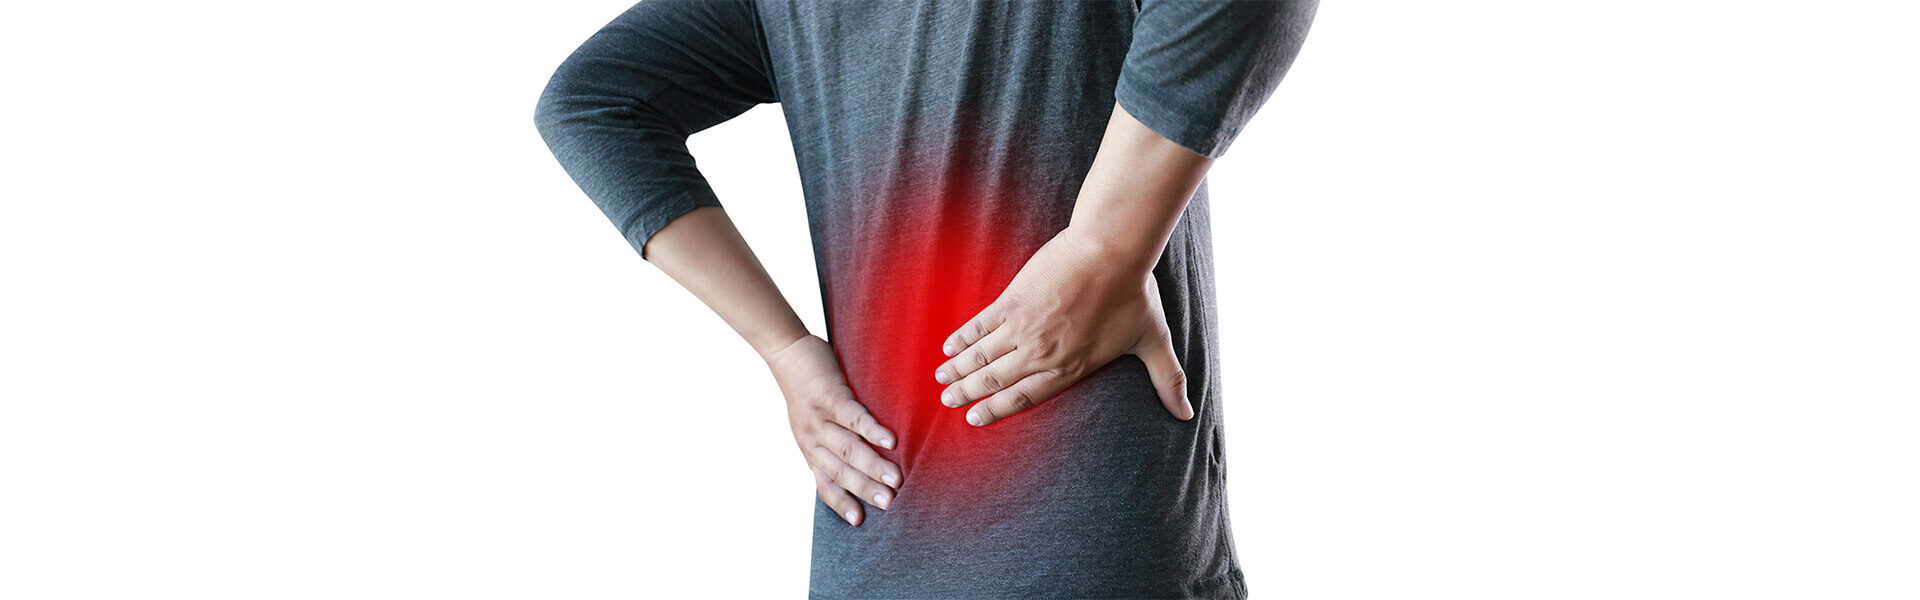 Lower Back Pain Treatment in Vancouver, WA